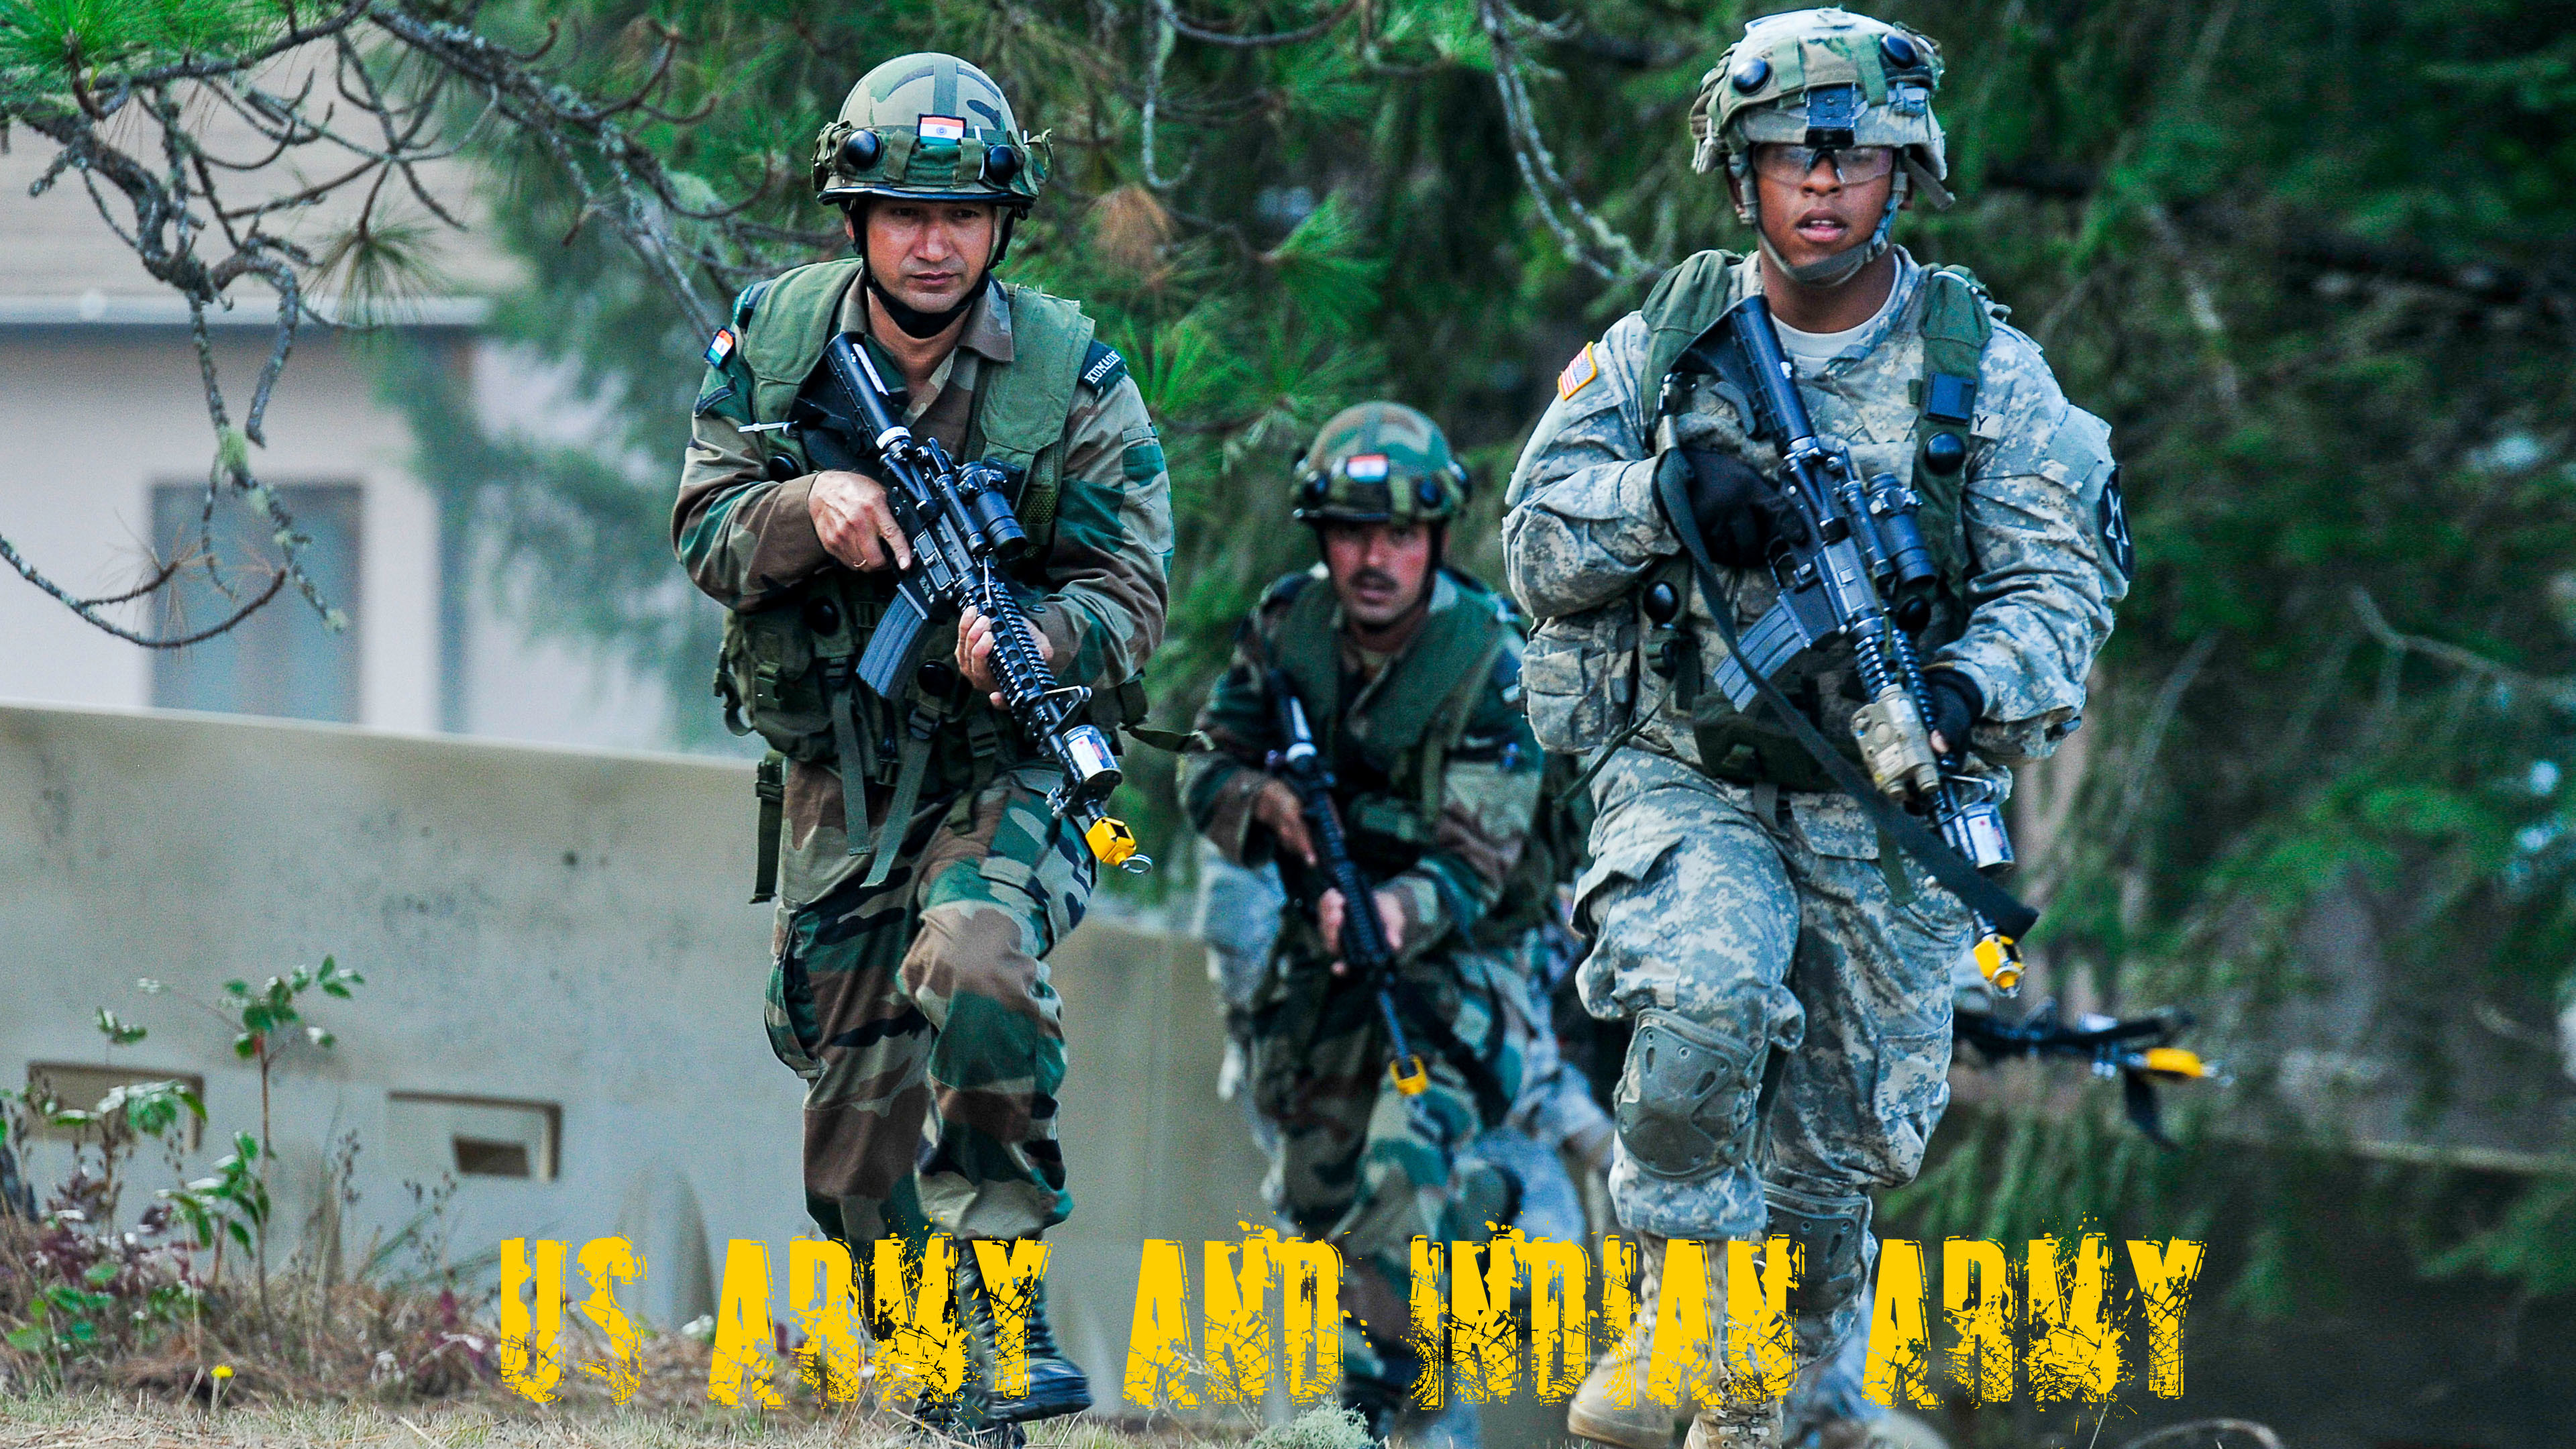 Us Army Wallpaper background picture